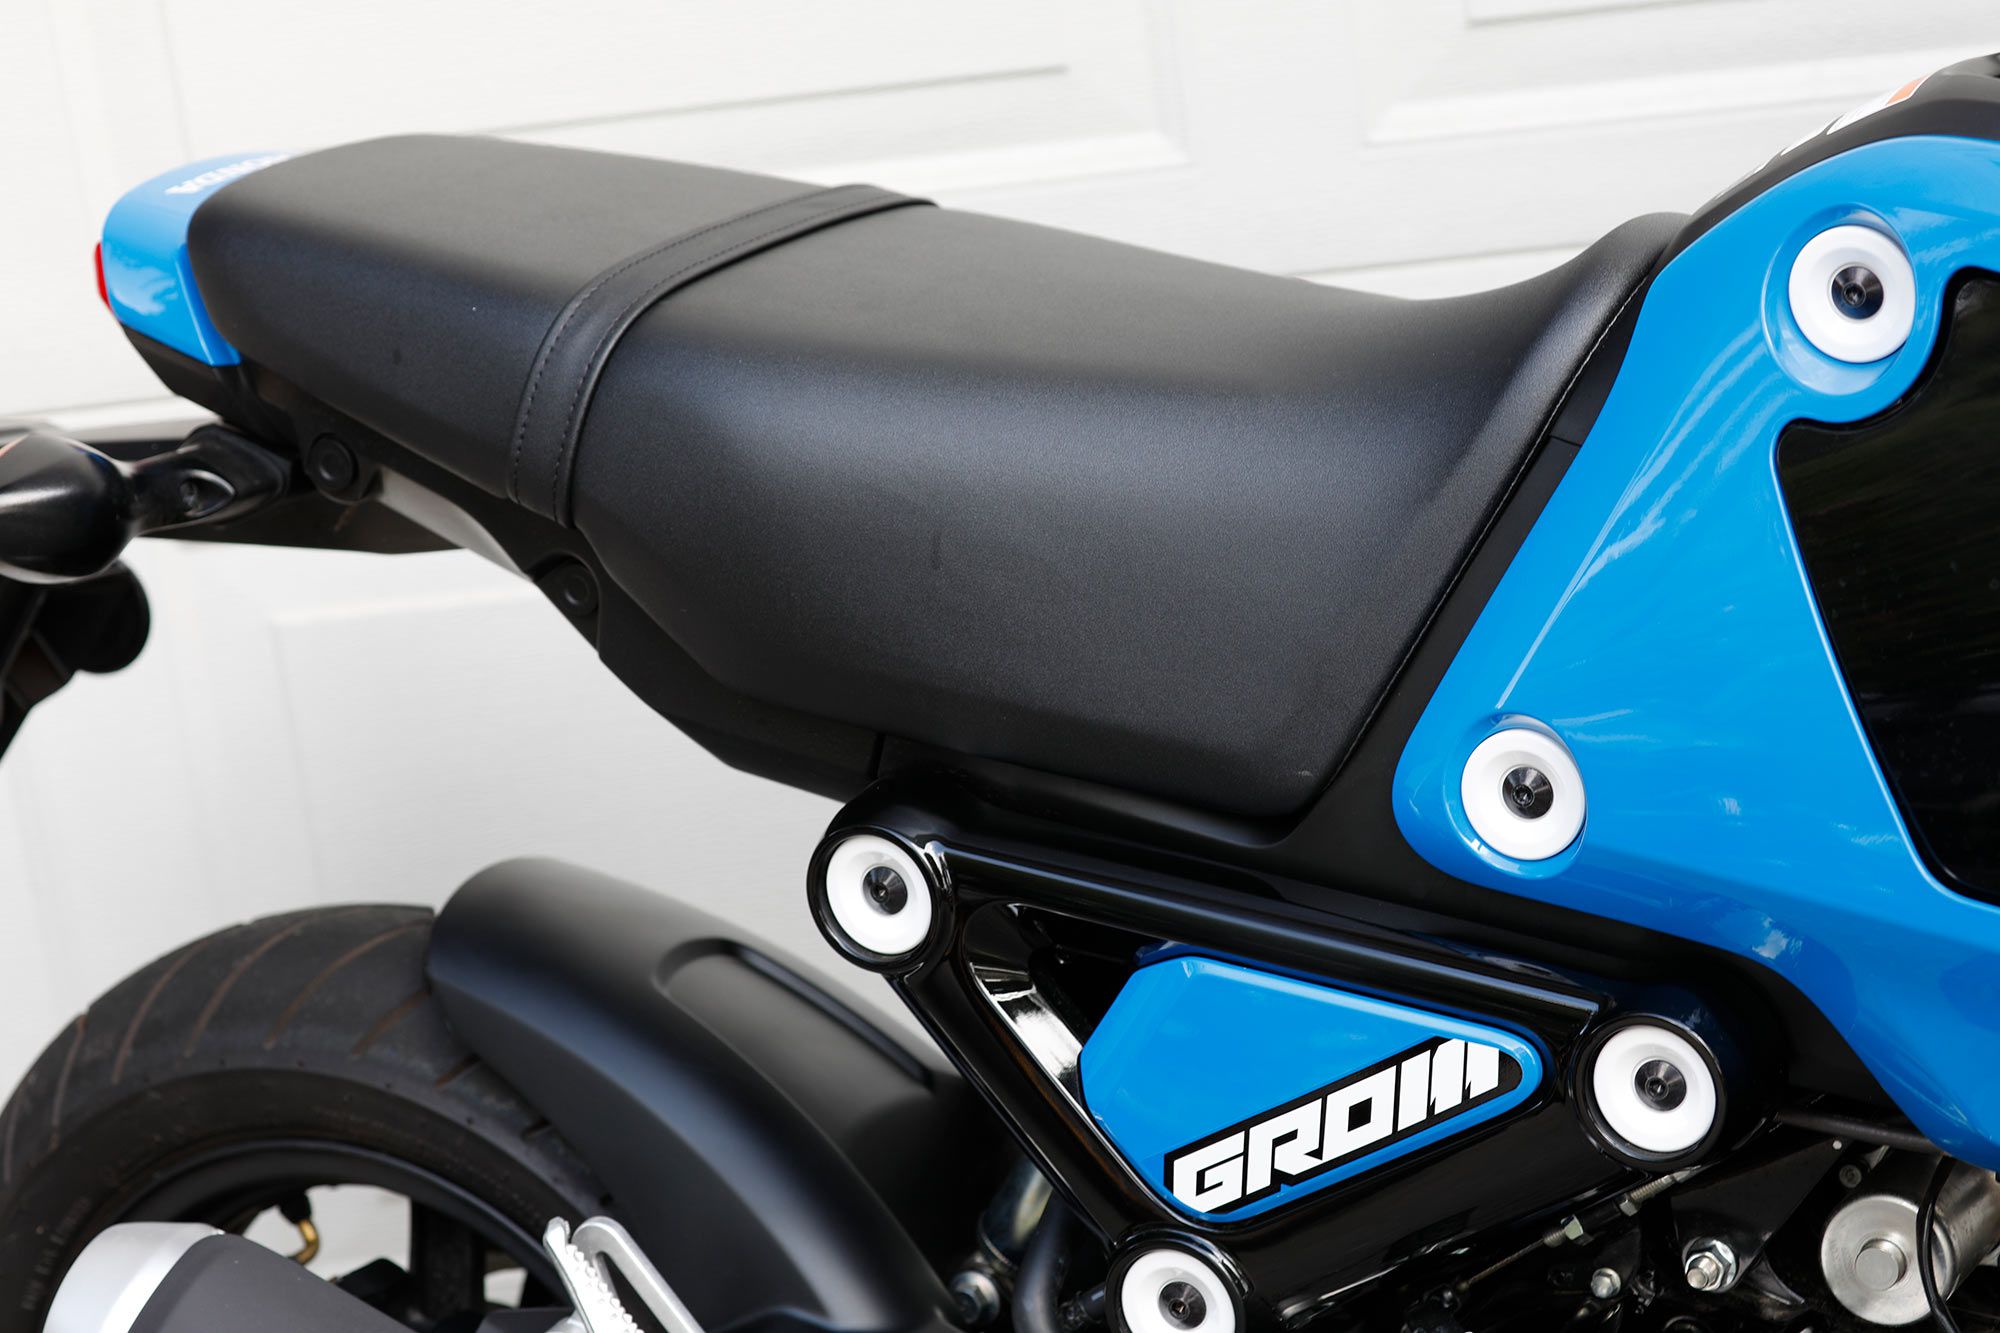 The one-piece seat uses higher density foam and has a flatter shape. This makes it easier for taller riders to get cozy on the Grom.